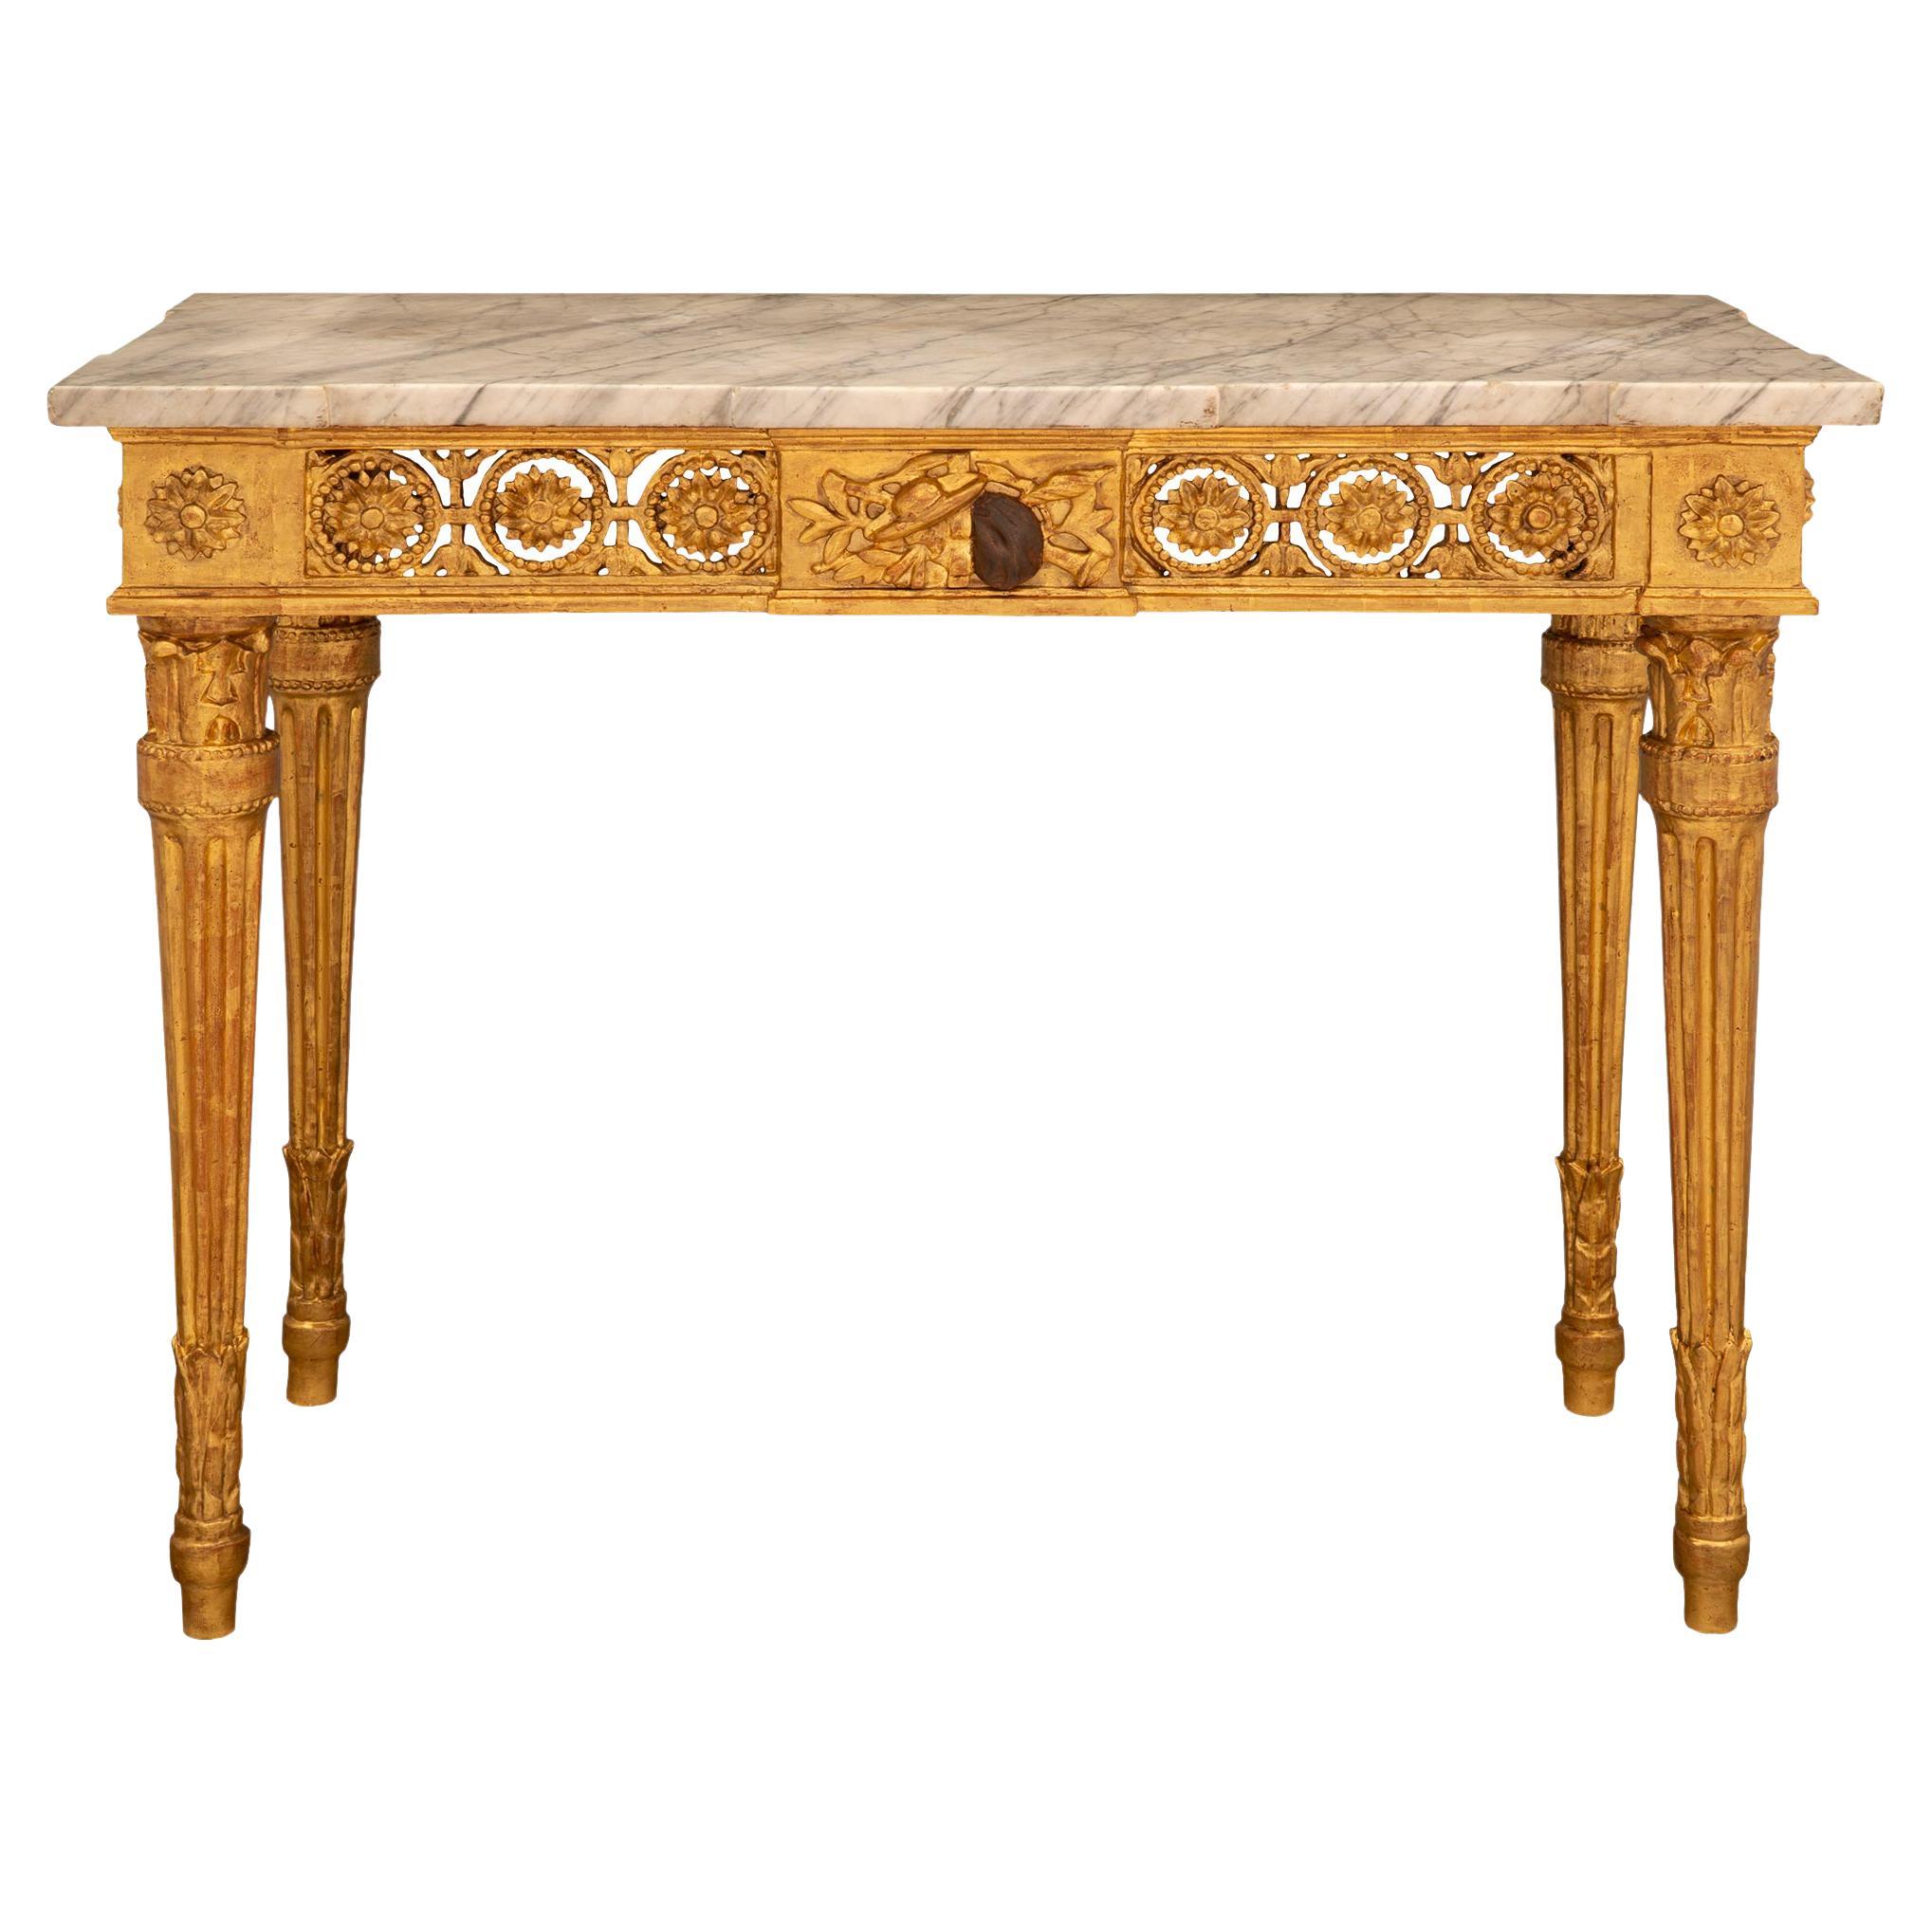 Italian 18th Century Louis XVI Period Giltwood, Polychrome and Marble Console